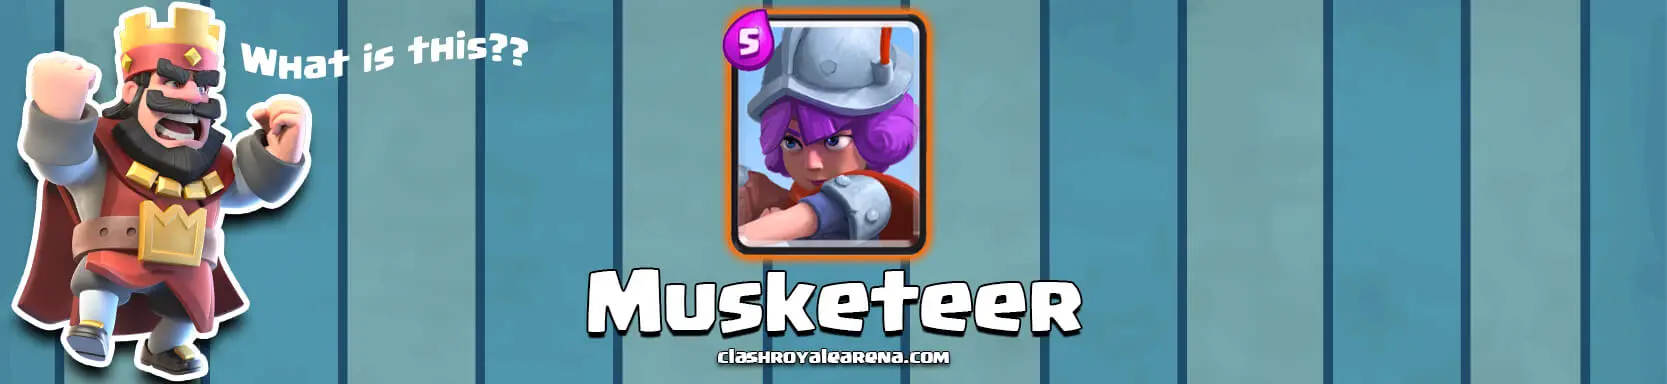 Musketeer Clash Royale